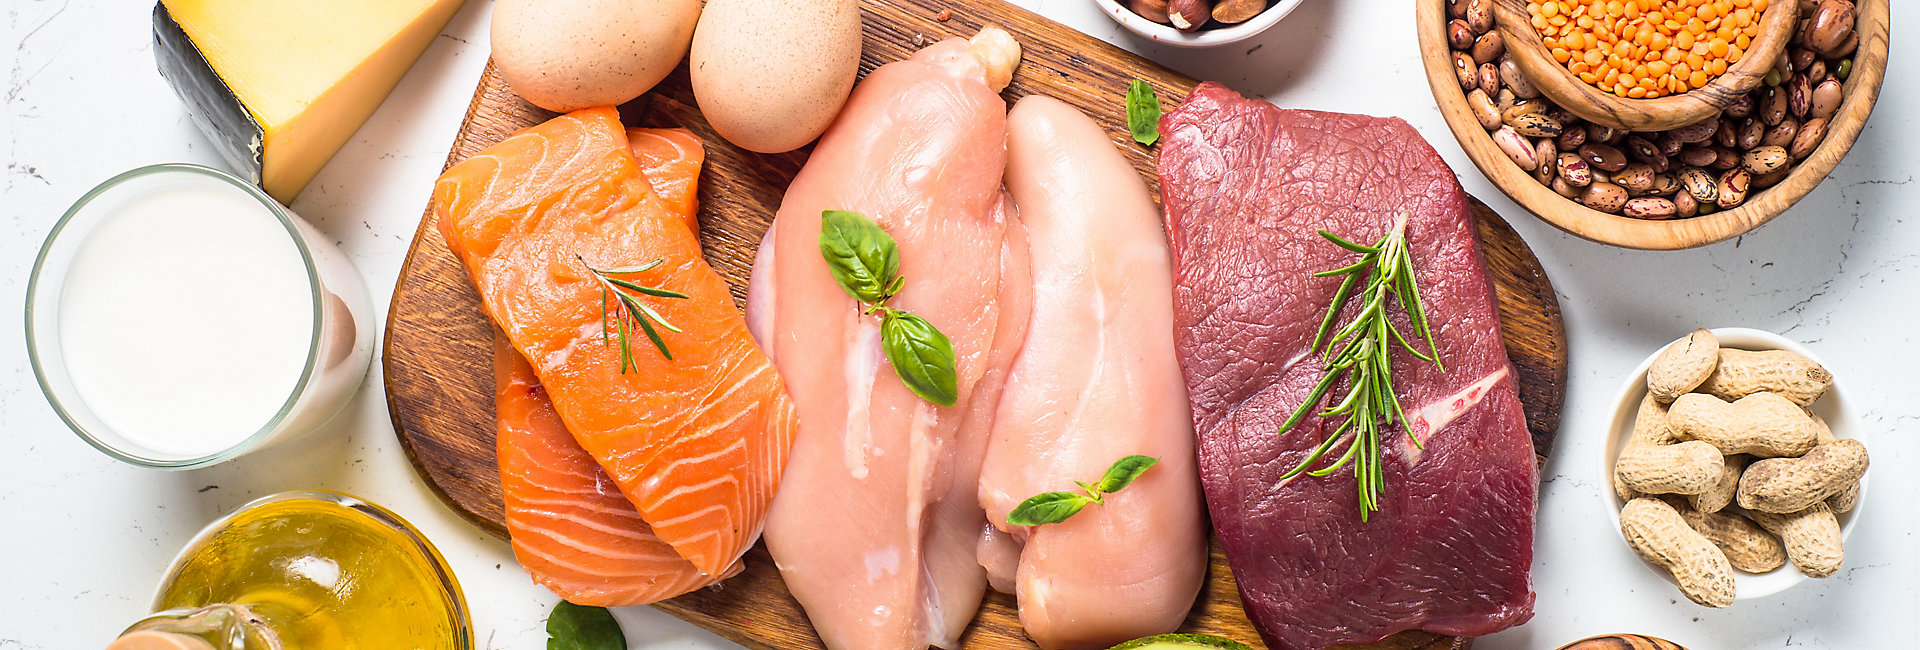 Kemin Food Technologies Extend Shelf Life & Color Meat & Poultry Products